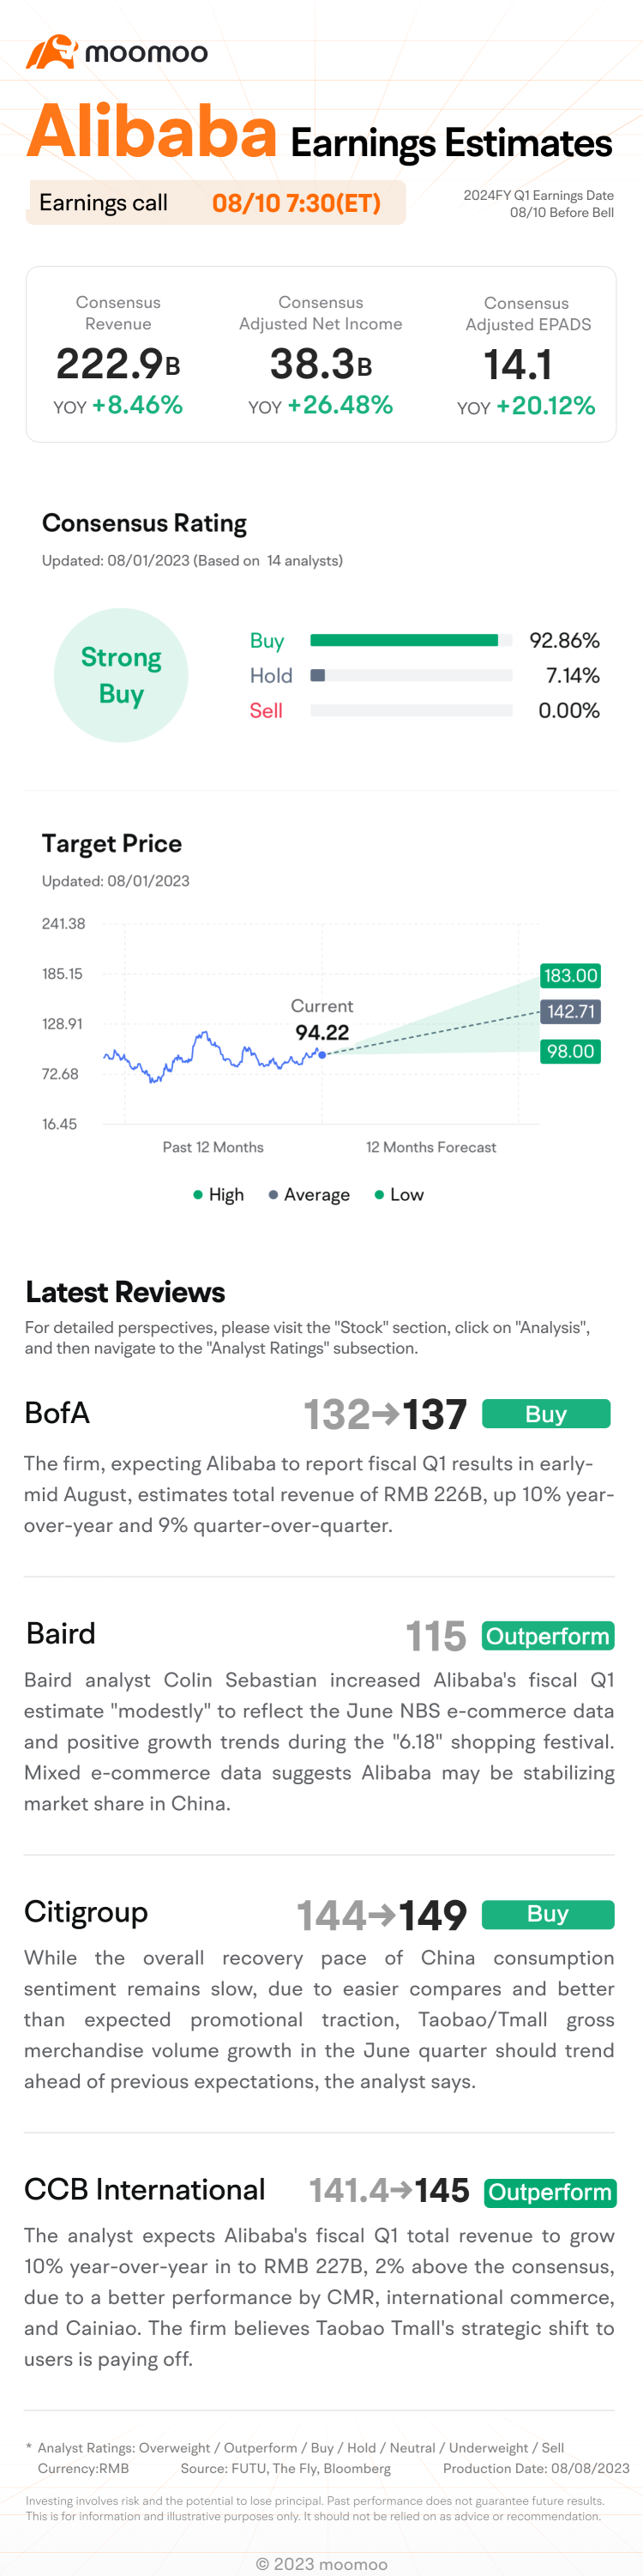 Alibaba 24FY Q1 Earnings Preview: Analysts Bullish Ahead of Earnings Report